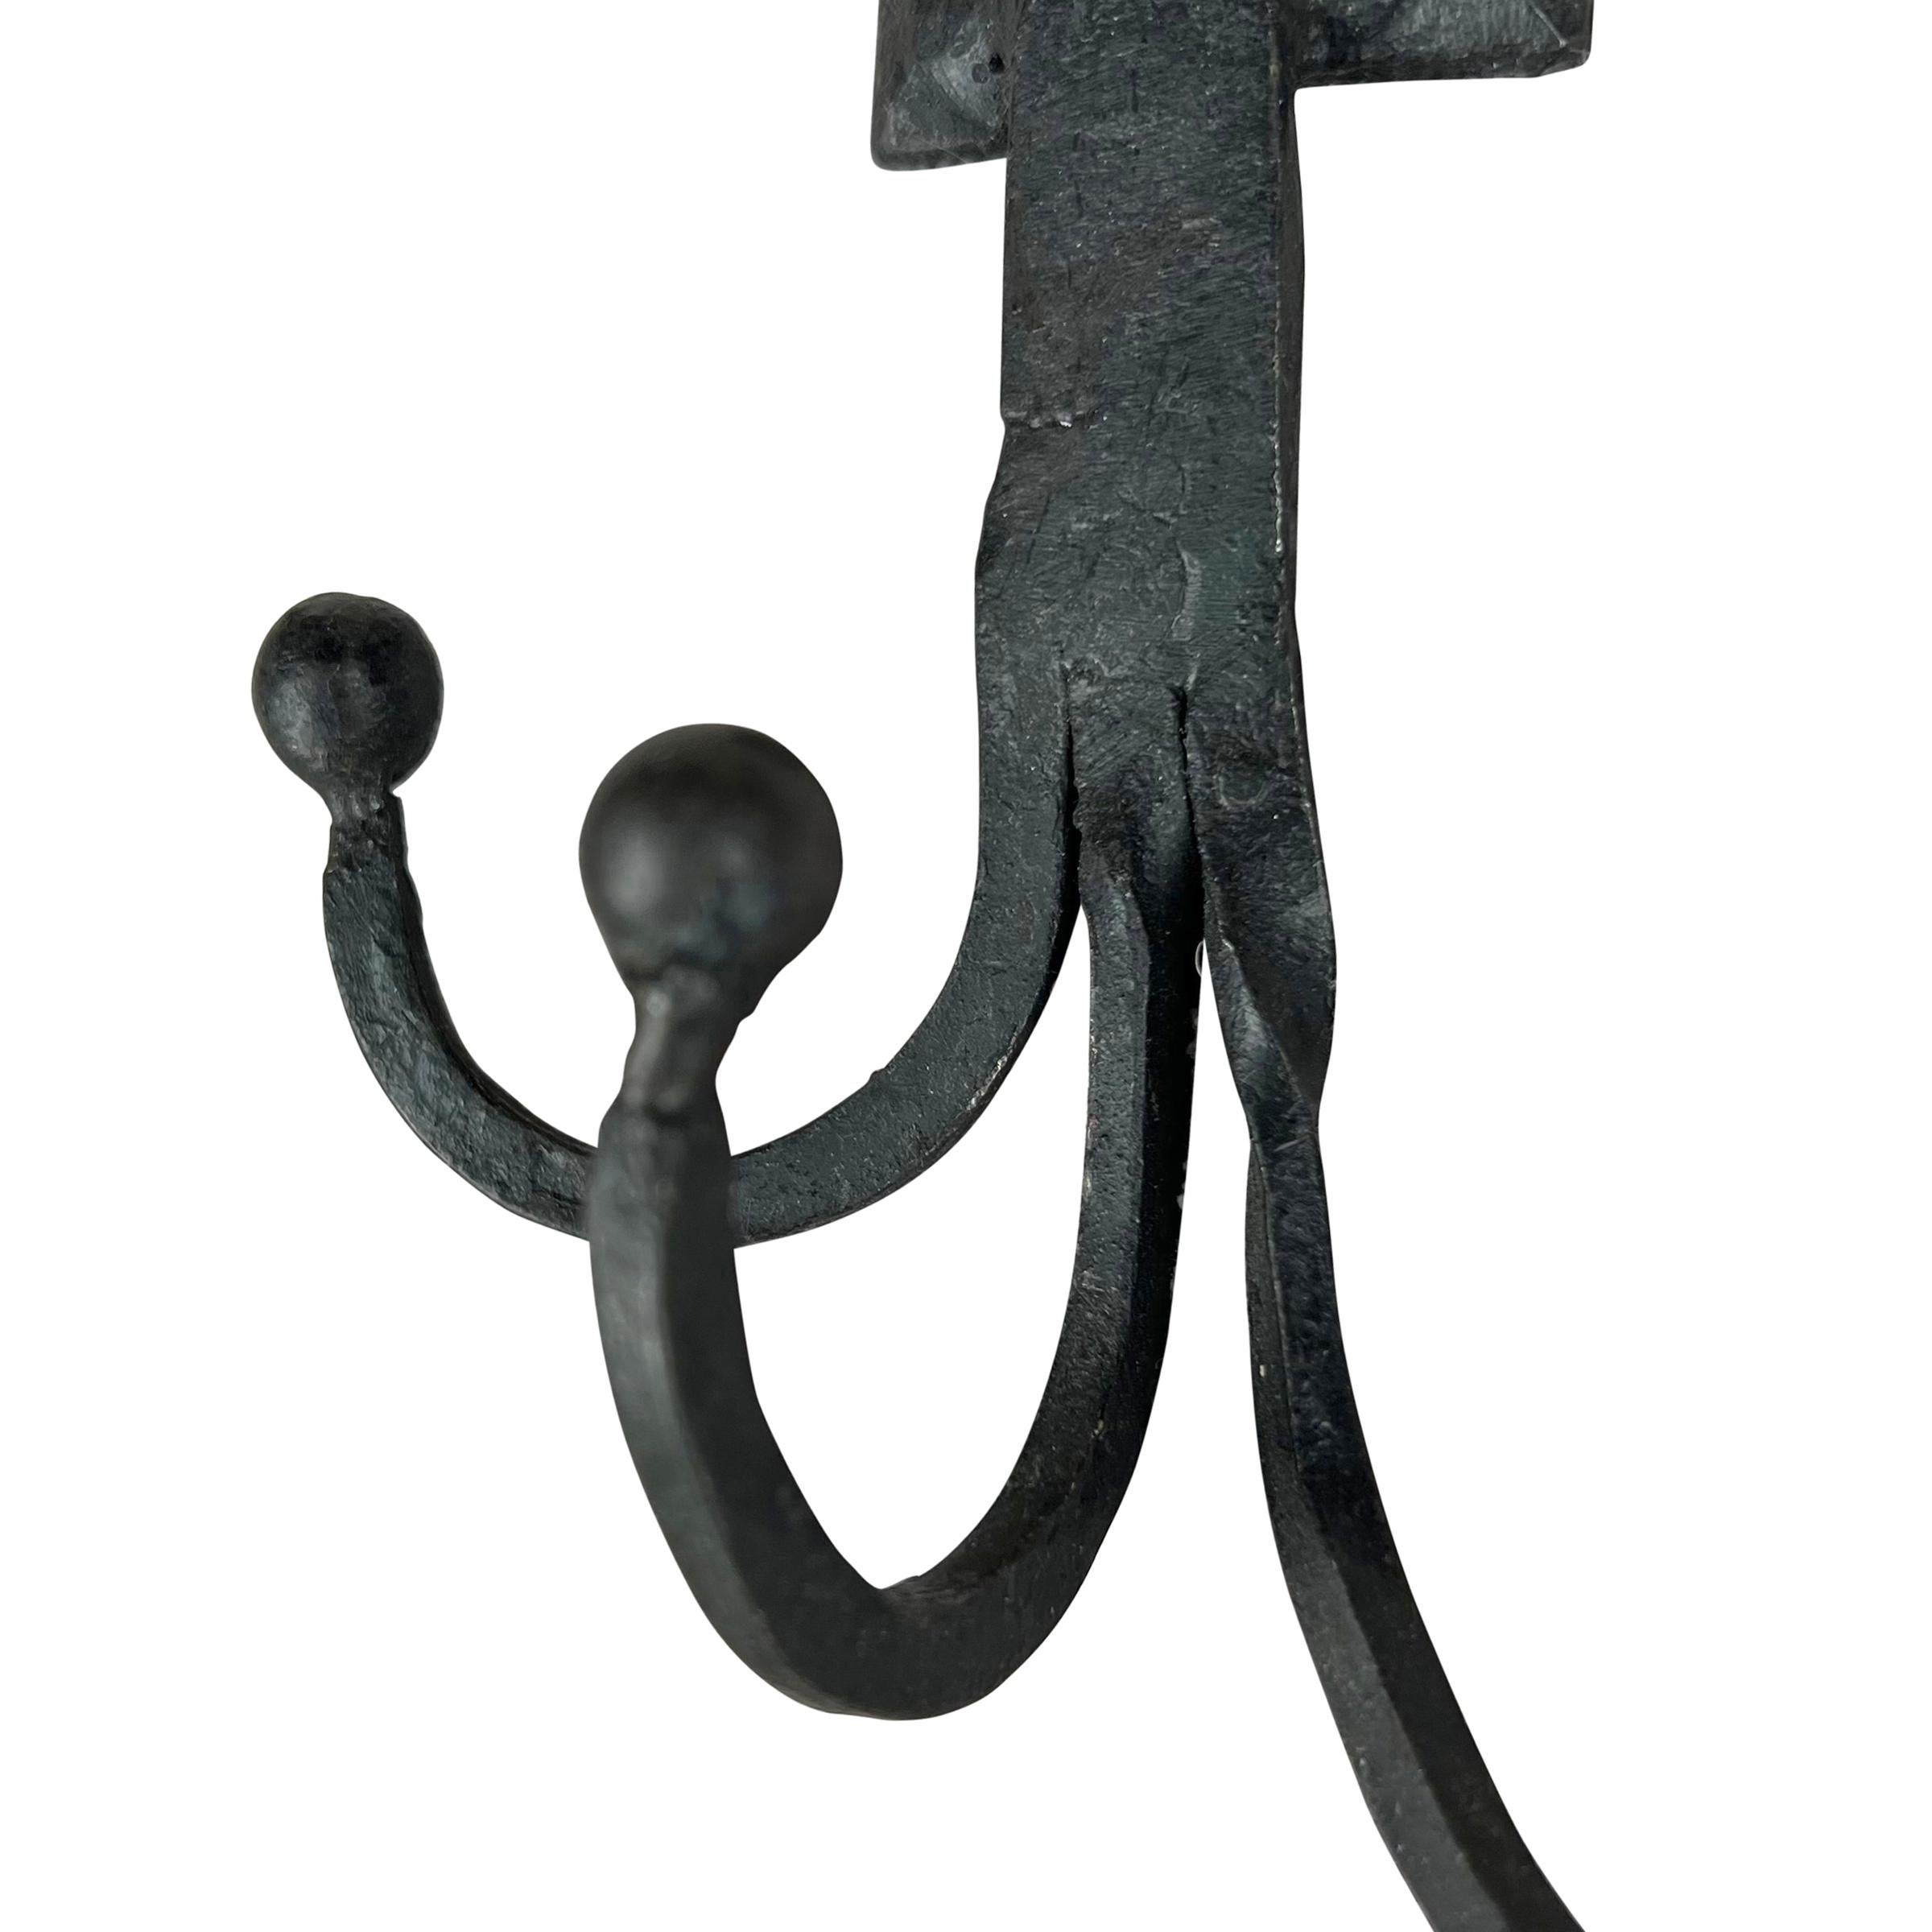 Vintage Handwrought Iron Horse Wall Hook 1